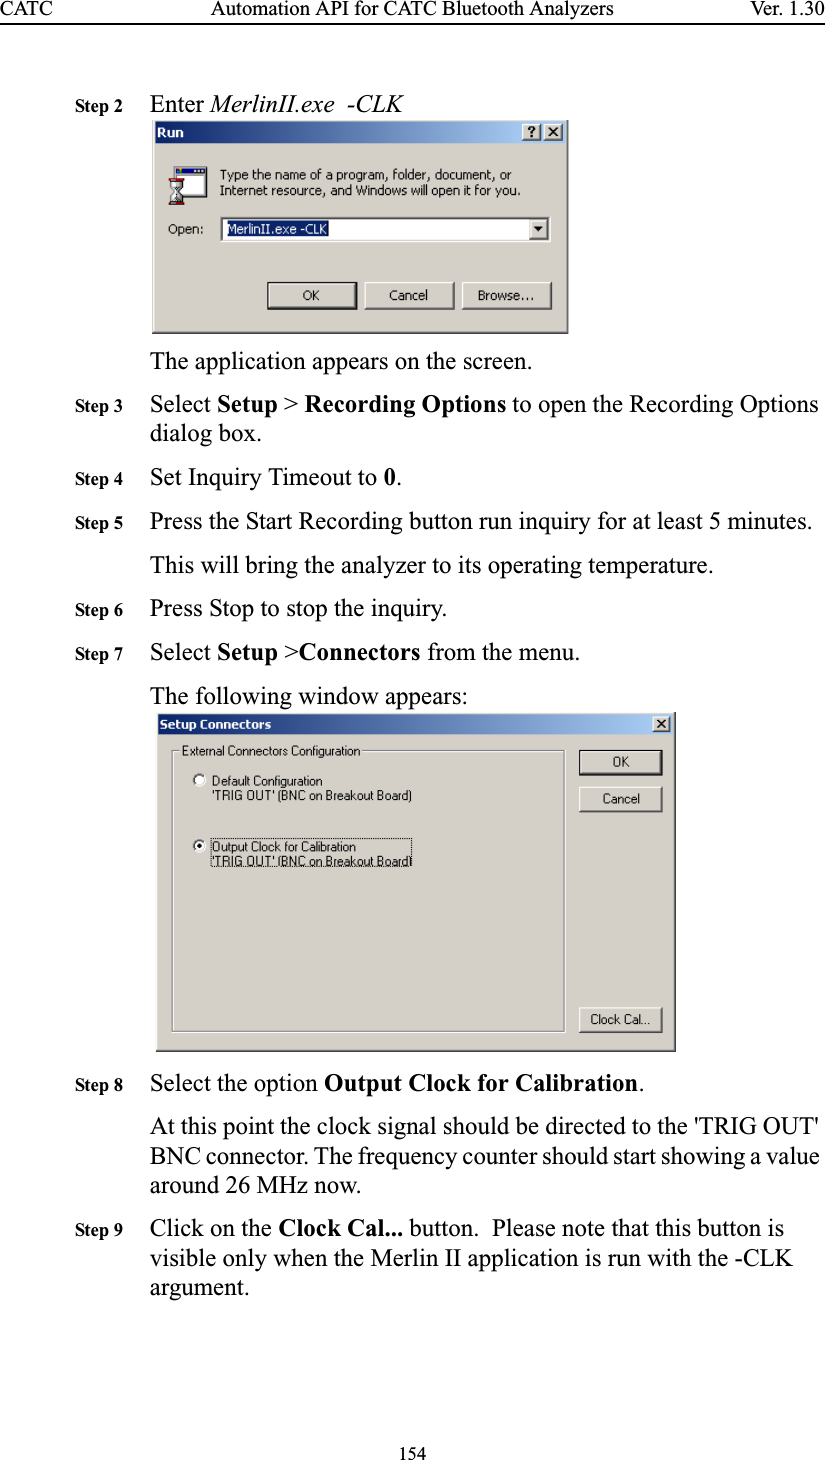 154Automation API for CATC Bluetooth AnalyzersCATC Ve r. 1.3 0Step 2 Enter MerlinII.exe  -CLK  The application appears on the screen.Step 3 Select Setup &gt; Recording Options to open the Recording Options dialog box.Step 4 Set Inquiry Timeout to 0.Step 5 Press the Start Recording button run inquiry for at least 5 minutes. This will bring the analyzer to its operating temperature.Step 6 Press Stop to stop the inquiry.Step 7 Select Setup &gt;Connectors from the menu.The following window appears:  Step 8 Select the option Output Clock for Calibration.At this point the clock signal should be directed to the &apos;TRIG OUT&apos; BNC connector. The frequency counter should start showing a value around 26 MHz now.Step 9 Click on the Clock Cal... button.  Please note that this button is visible only when the Merlin II application is run with the -CLK argument.